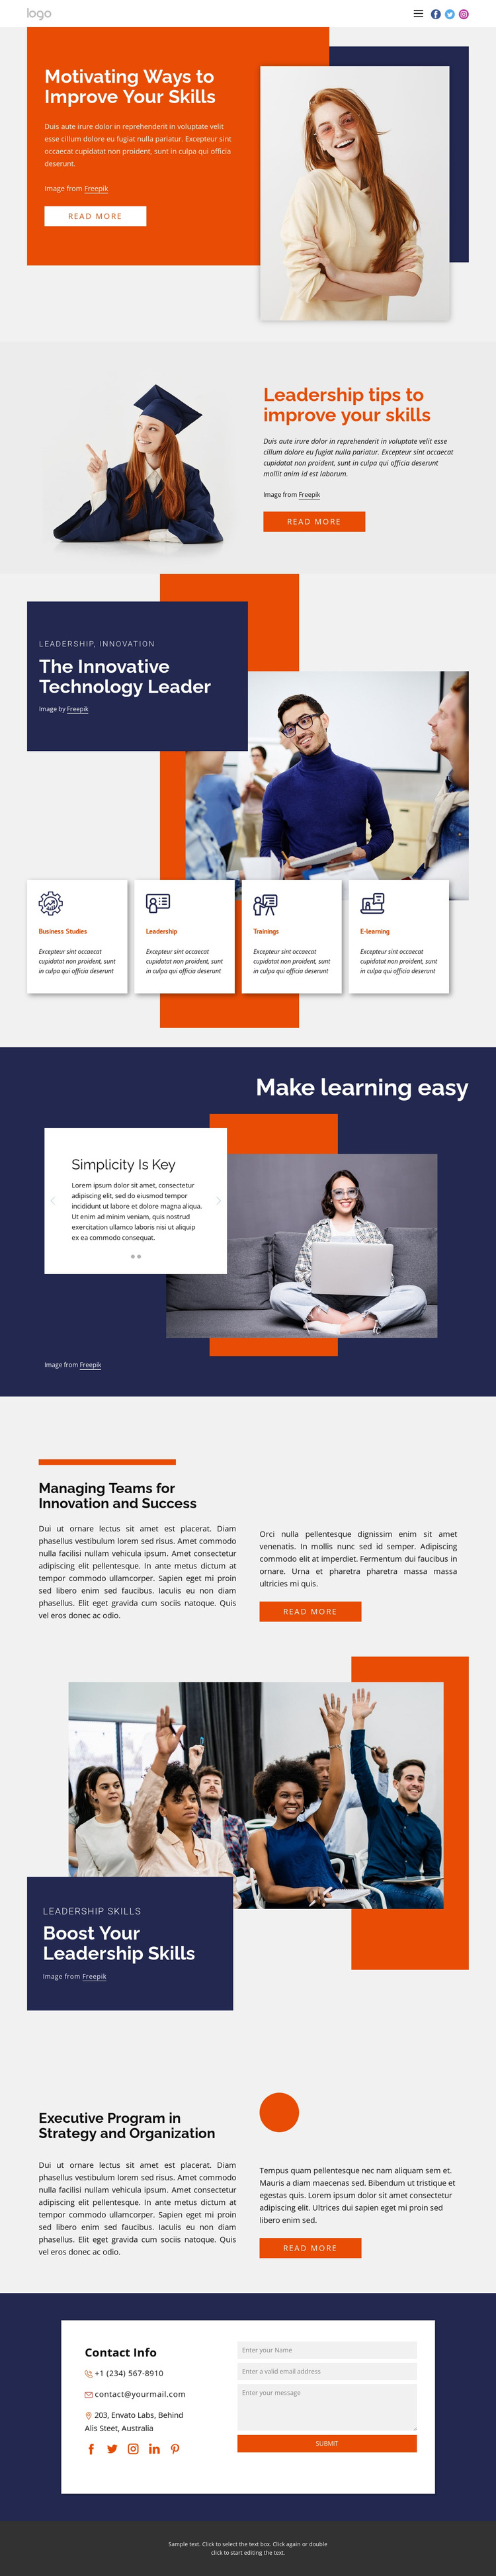 Drive your career forward HTML5 Template